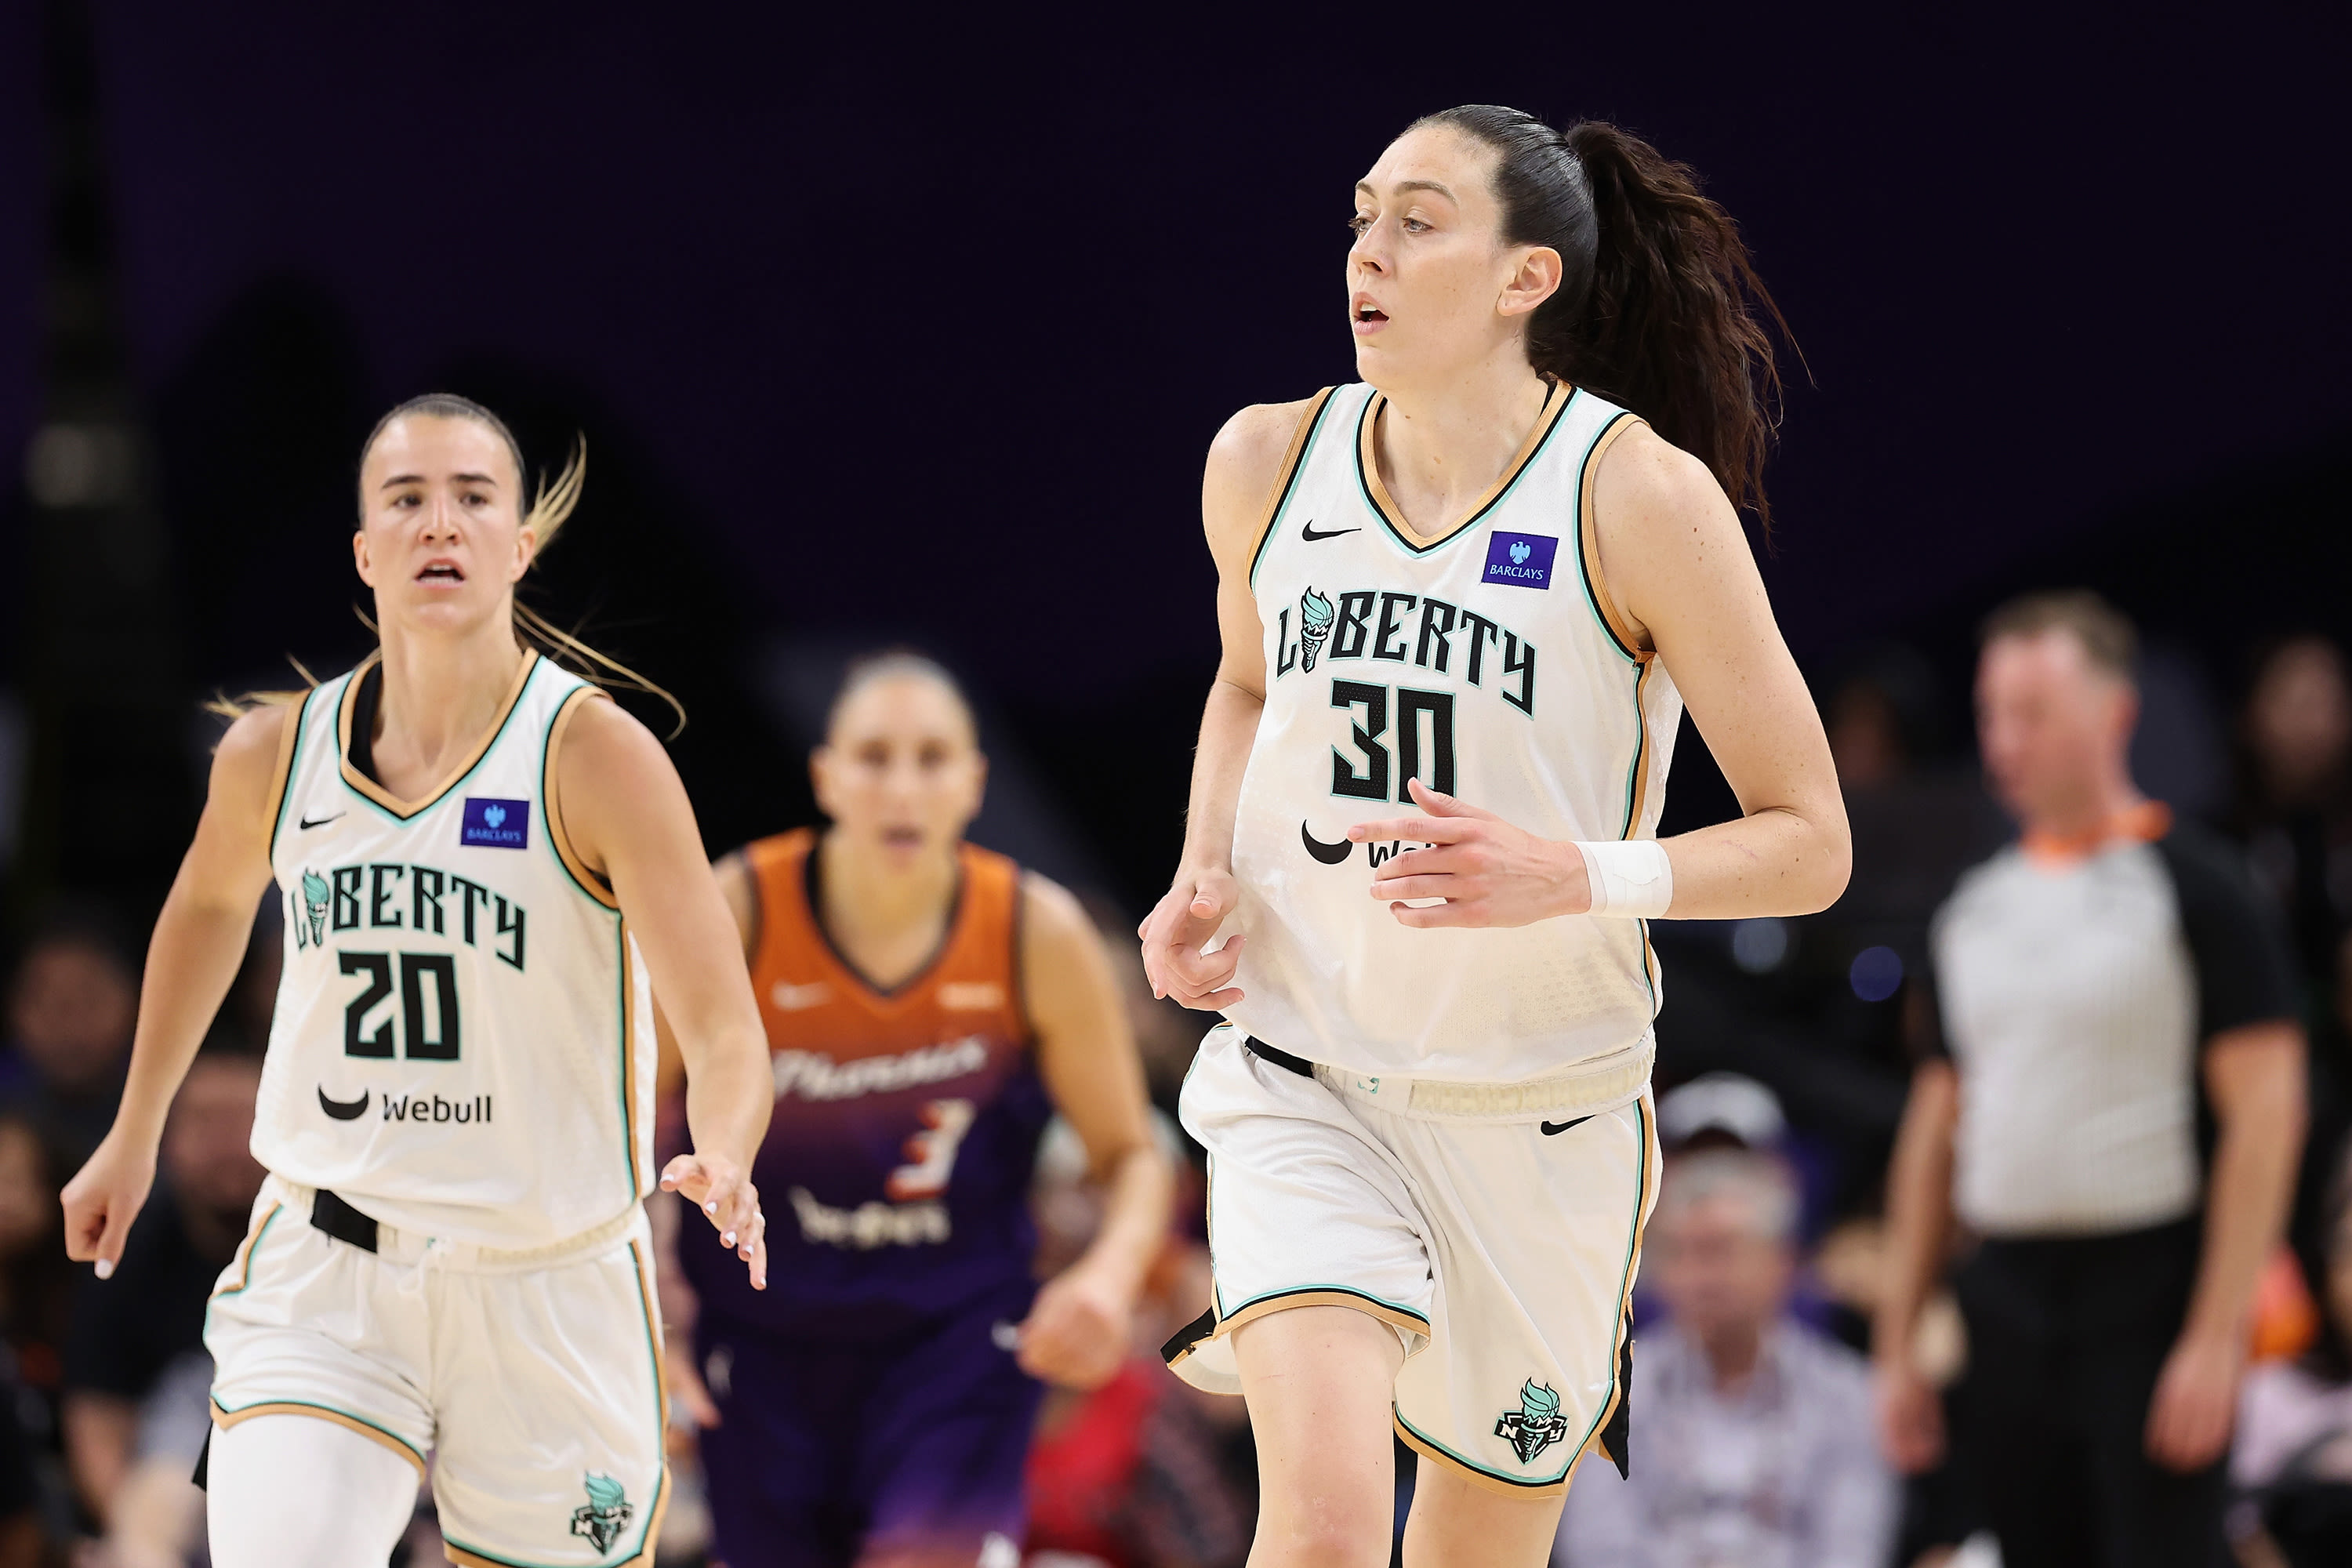 Breanna Stewart surpasses Diana Taurasi to become fastest WNBA player to reach 5,000 points